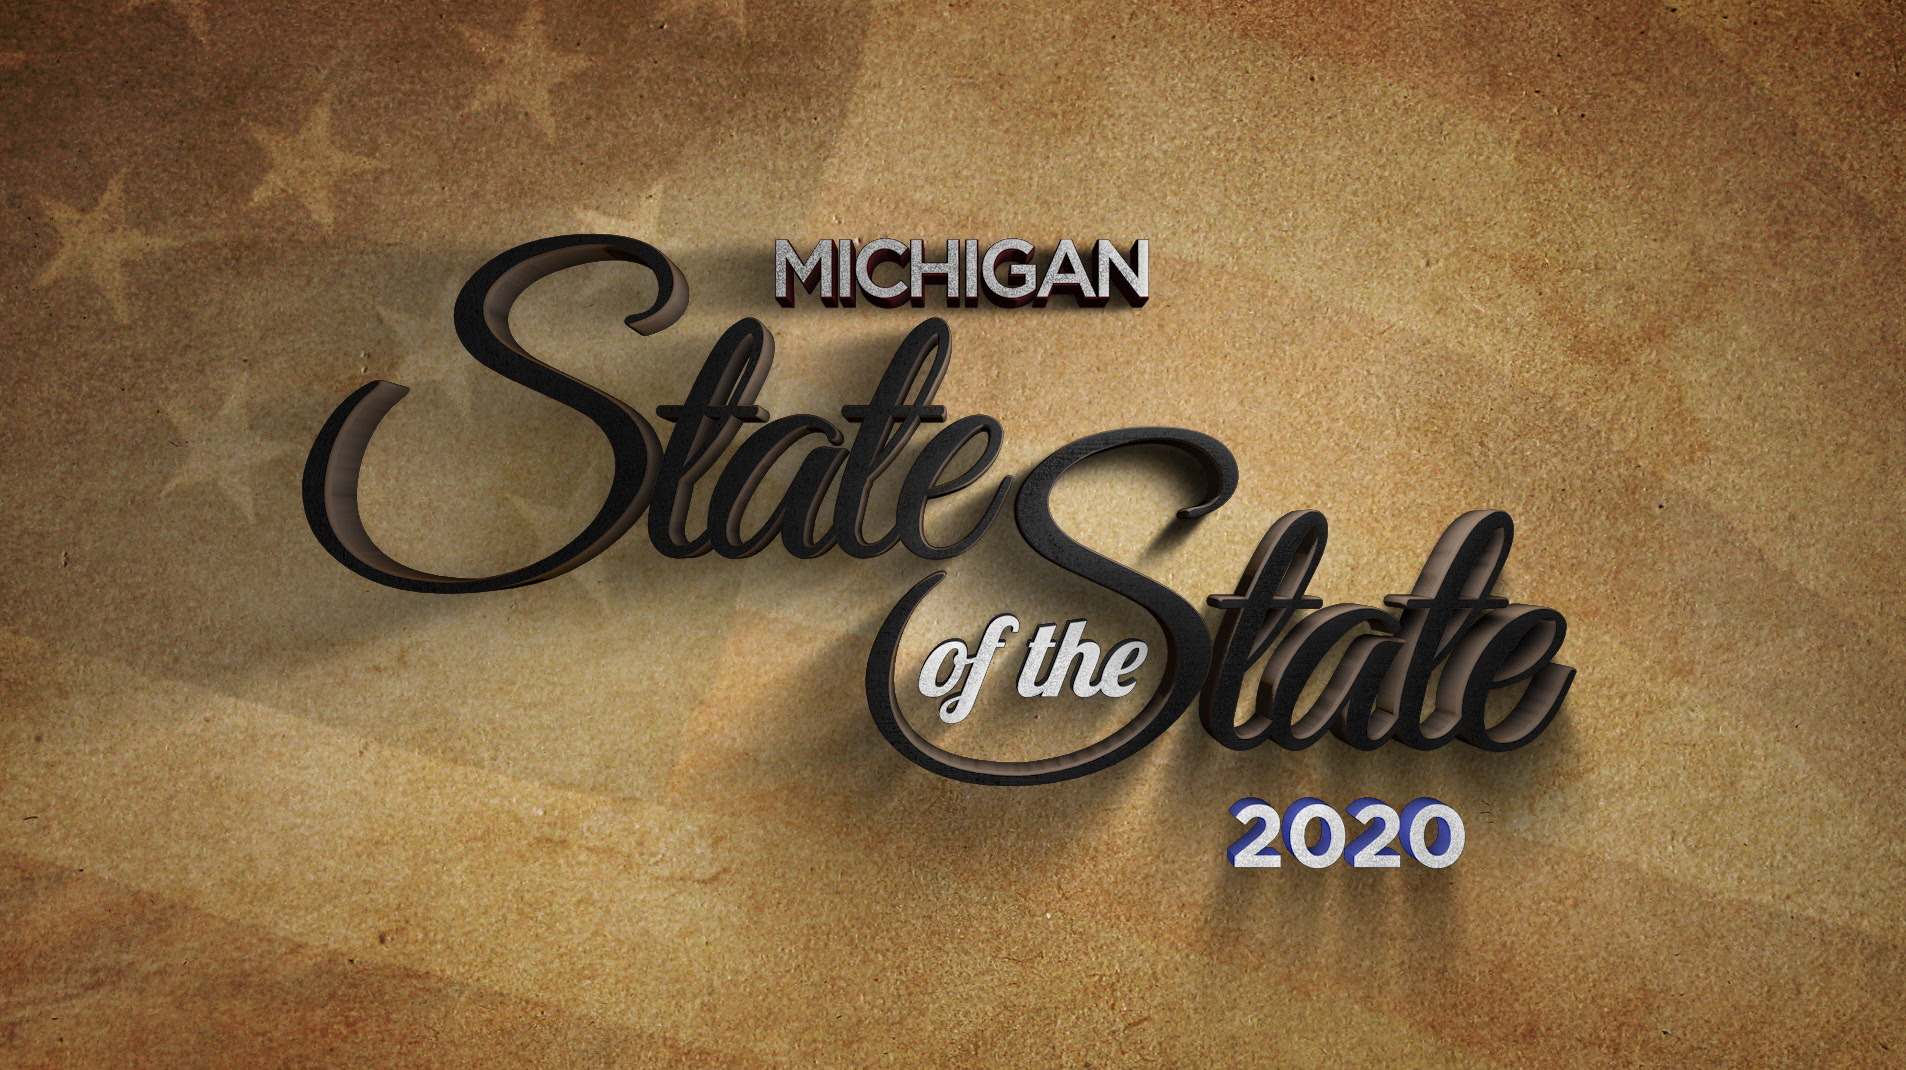 Michigan State of the State 2020 on Livestream